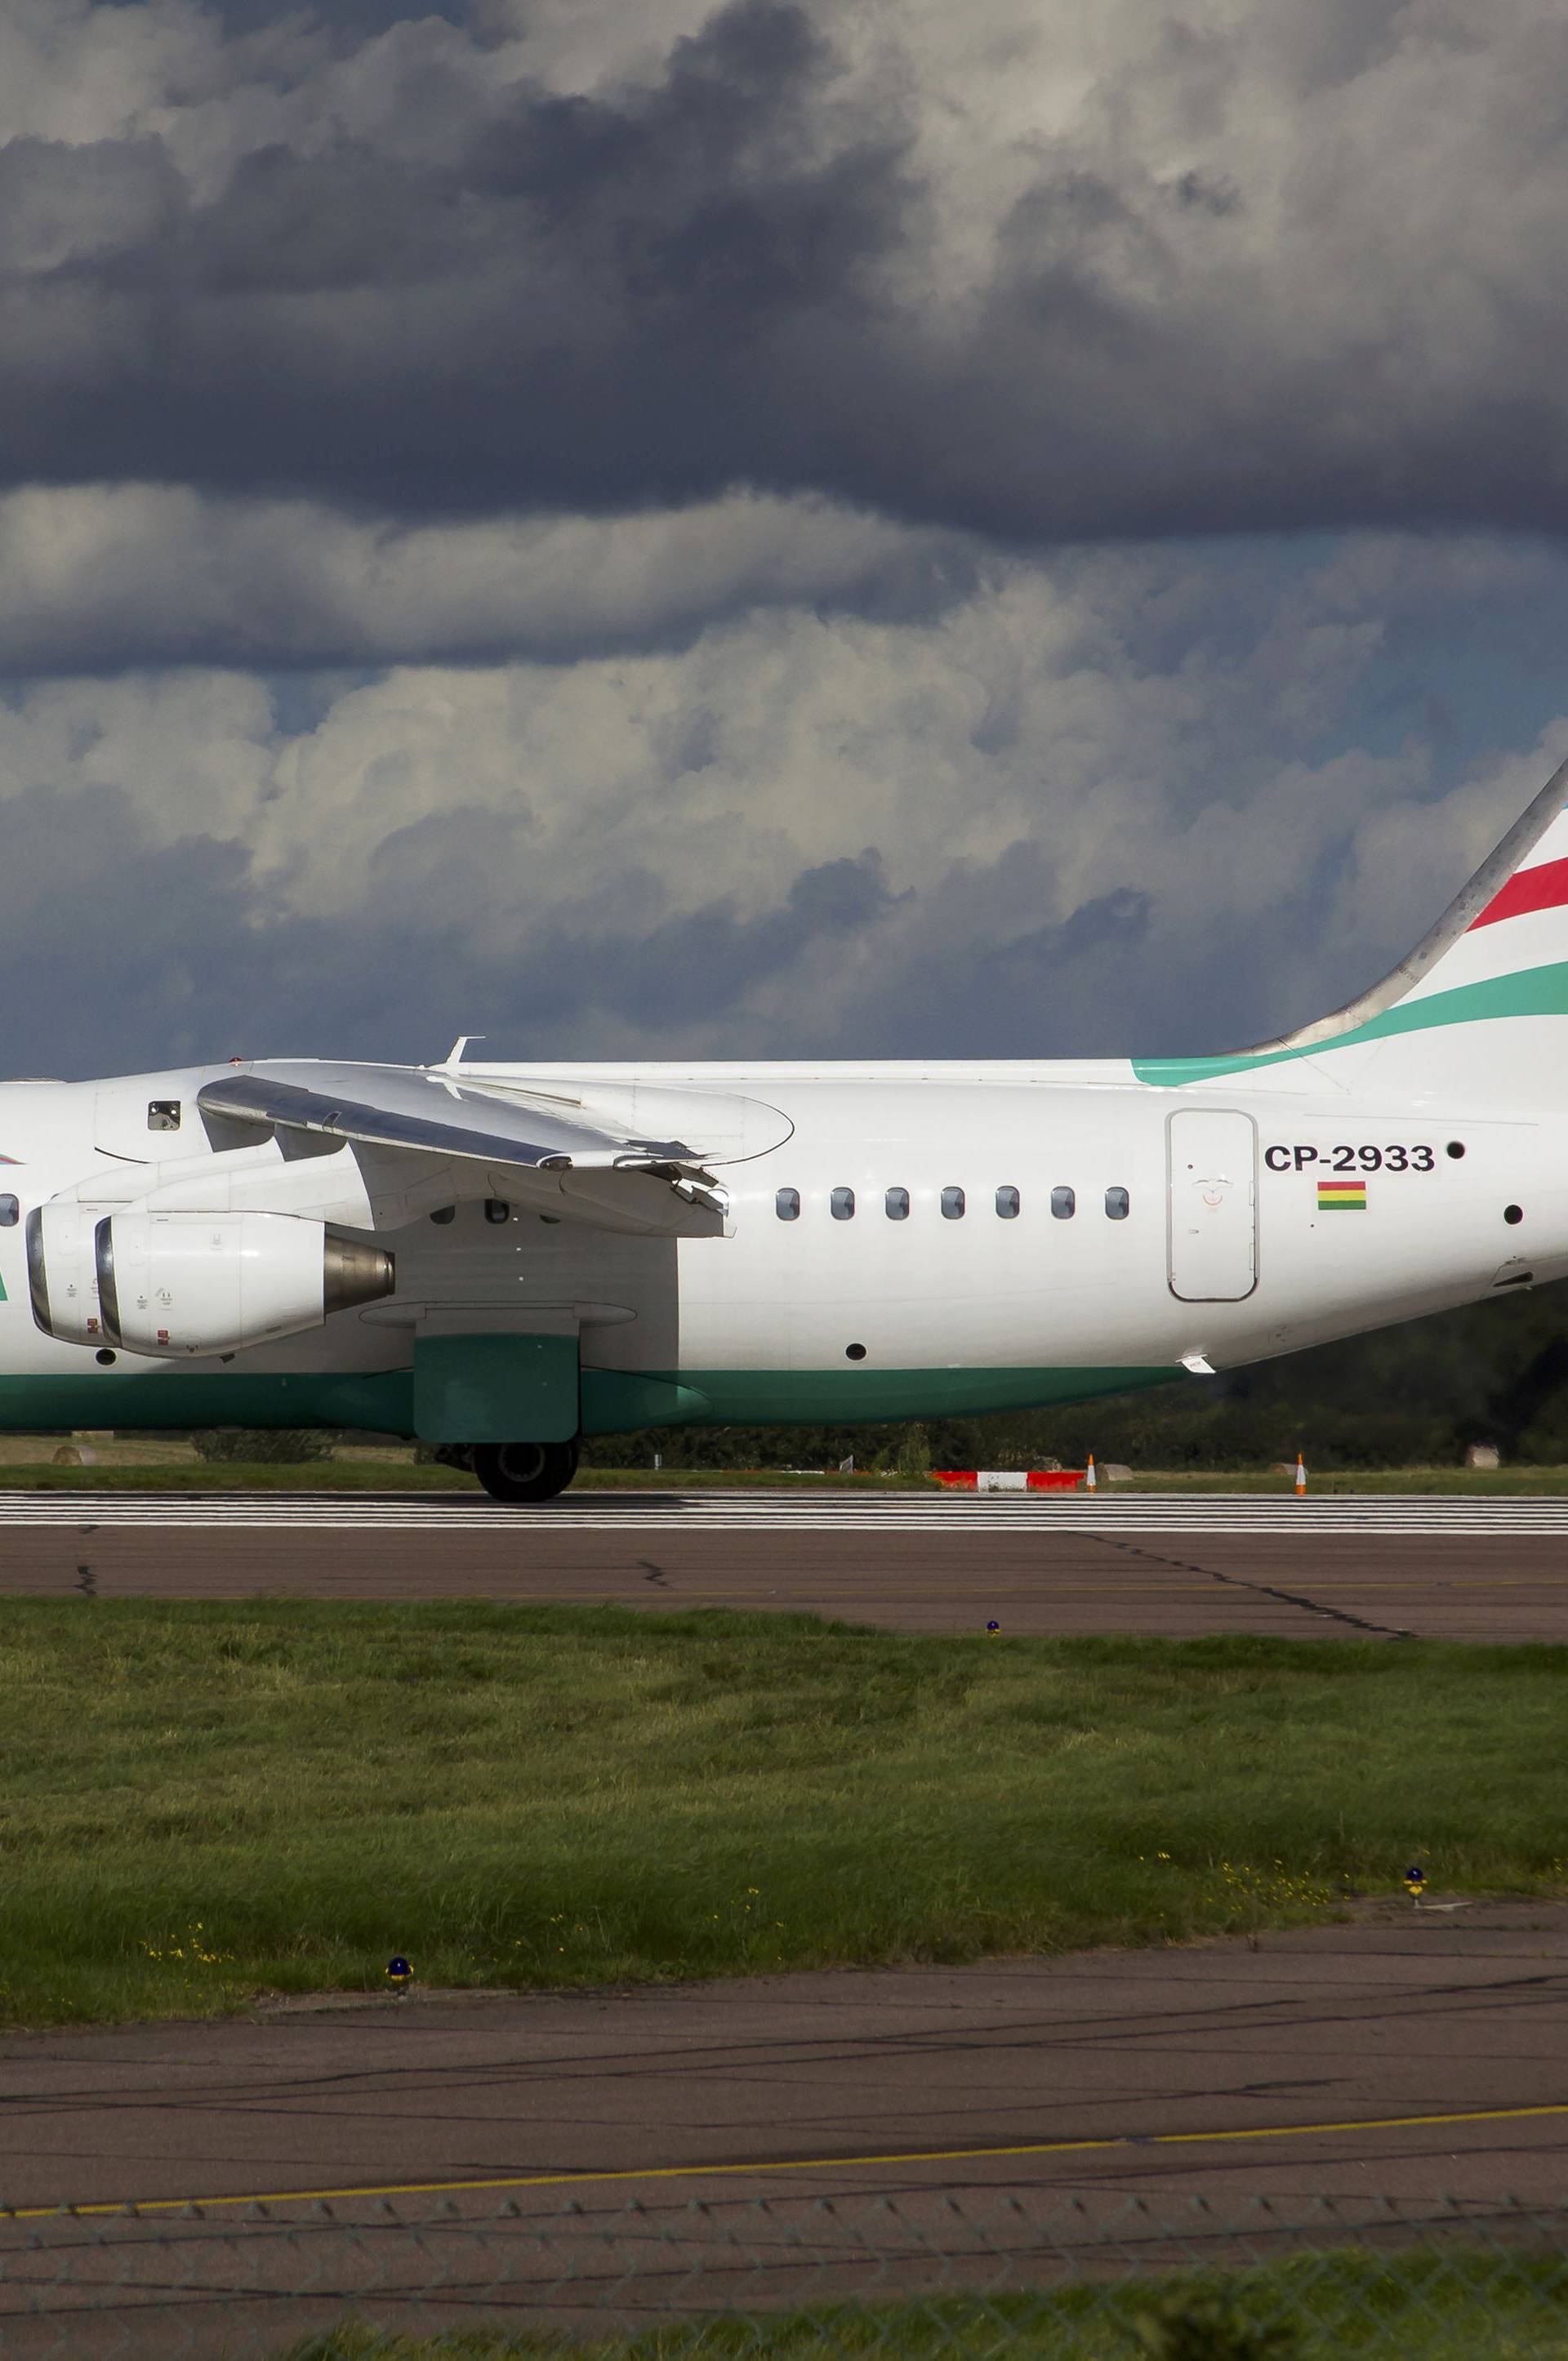 An Avro RJ85 operated by Lamia which crashed on approach to Medellin while carrying 81 passengers and crew including Brazilian football team Chapecoense is seen in a file picture